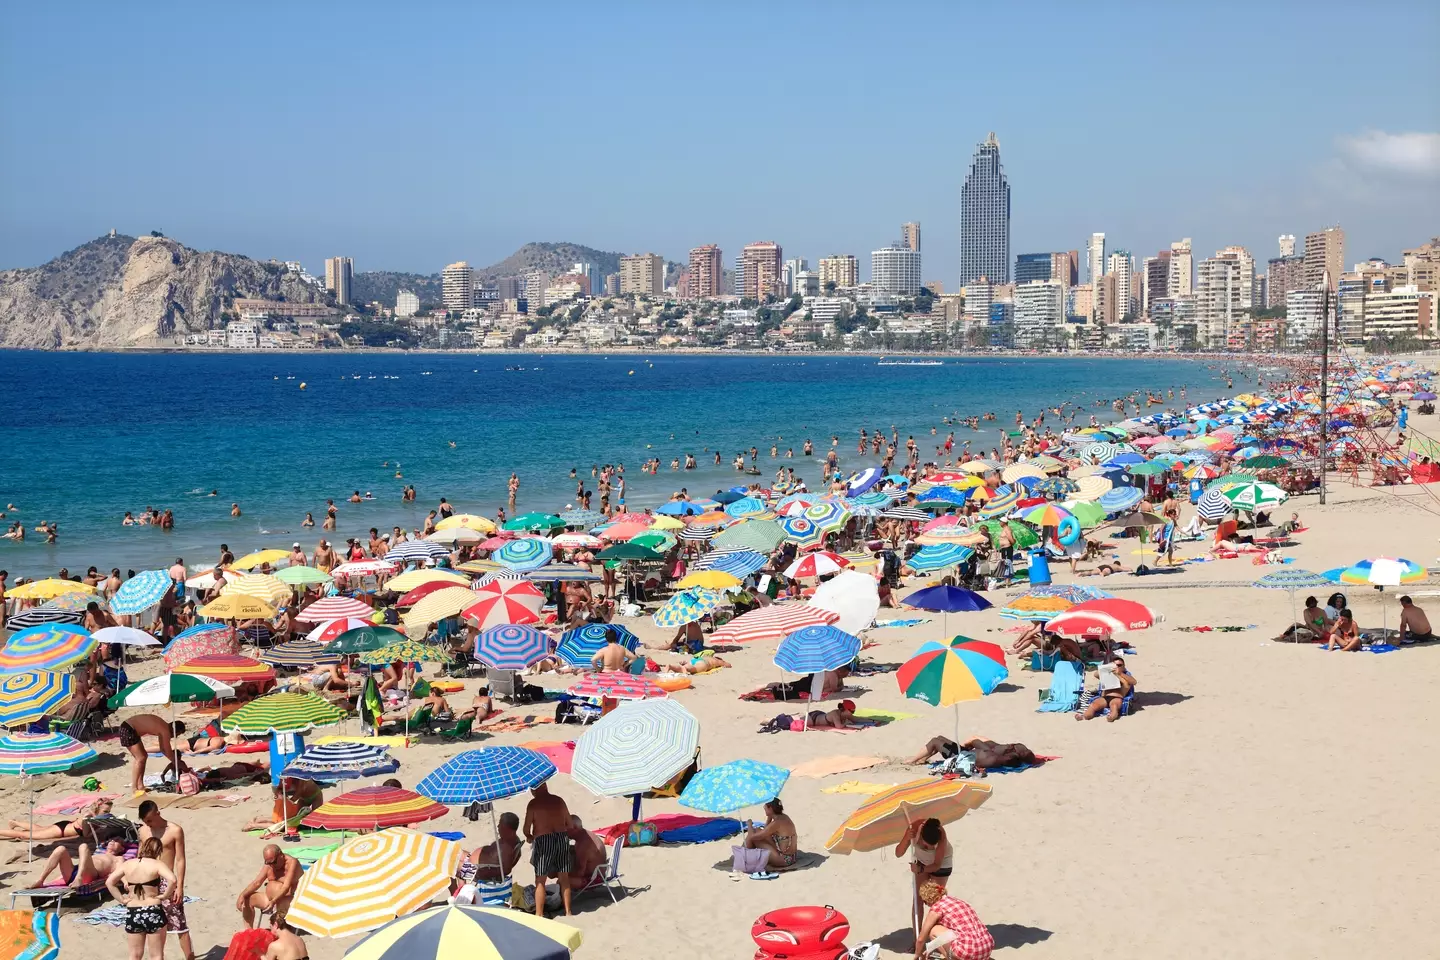 Tourists entering Spain may soon have to prove they have enough money to fund their trip abroad.